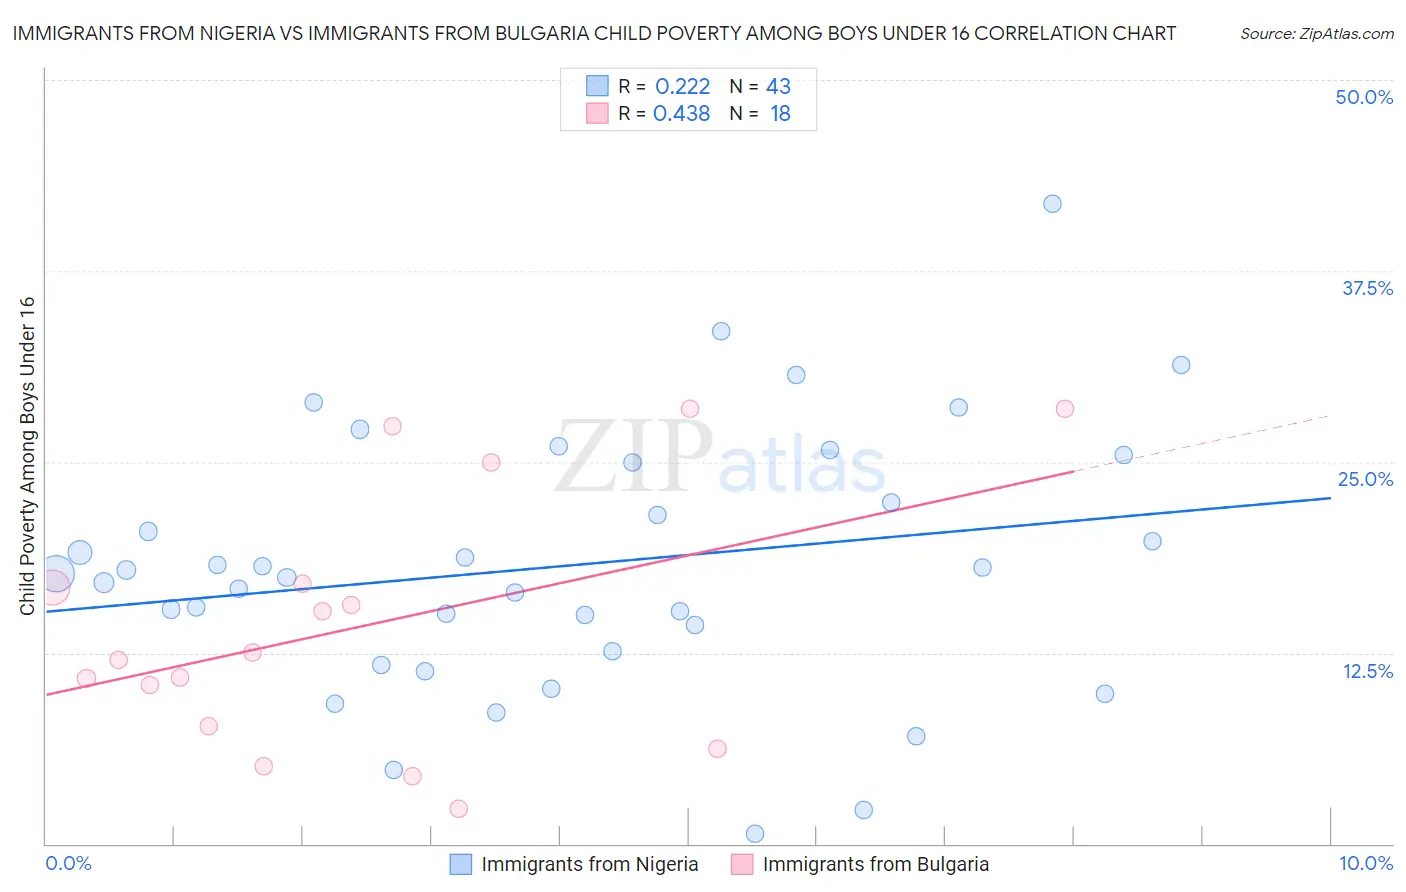 Immigrants from Nigeria vs Immigrants from Bulgaria Child Poverty Among Boys Under 16